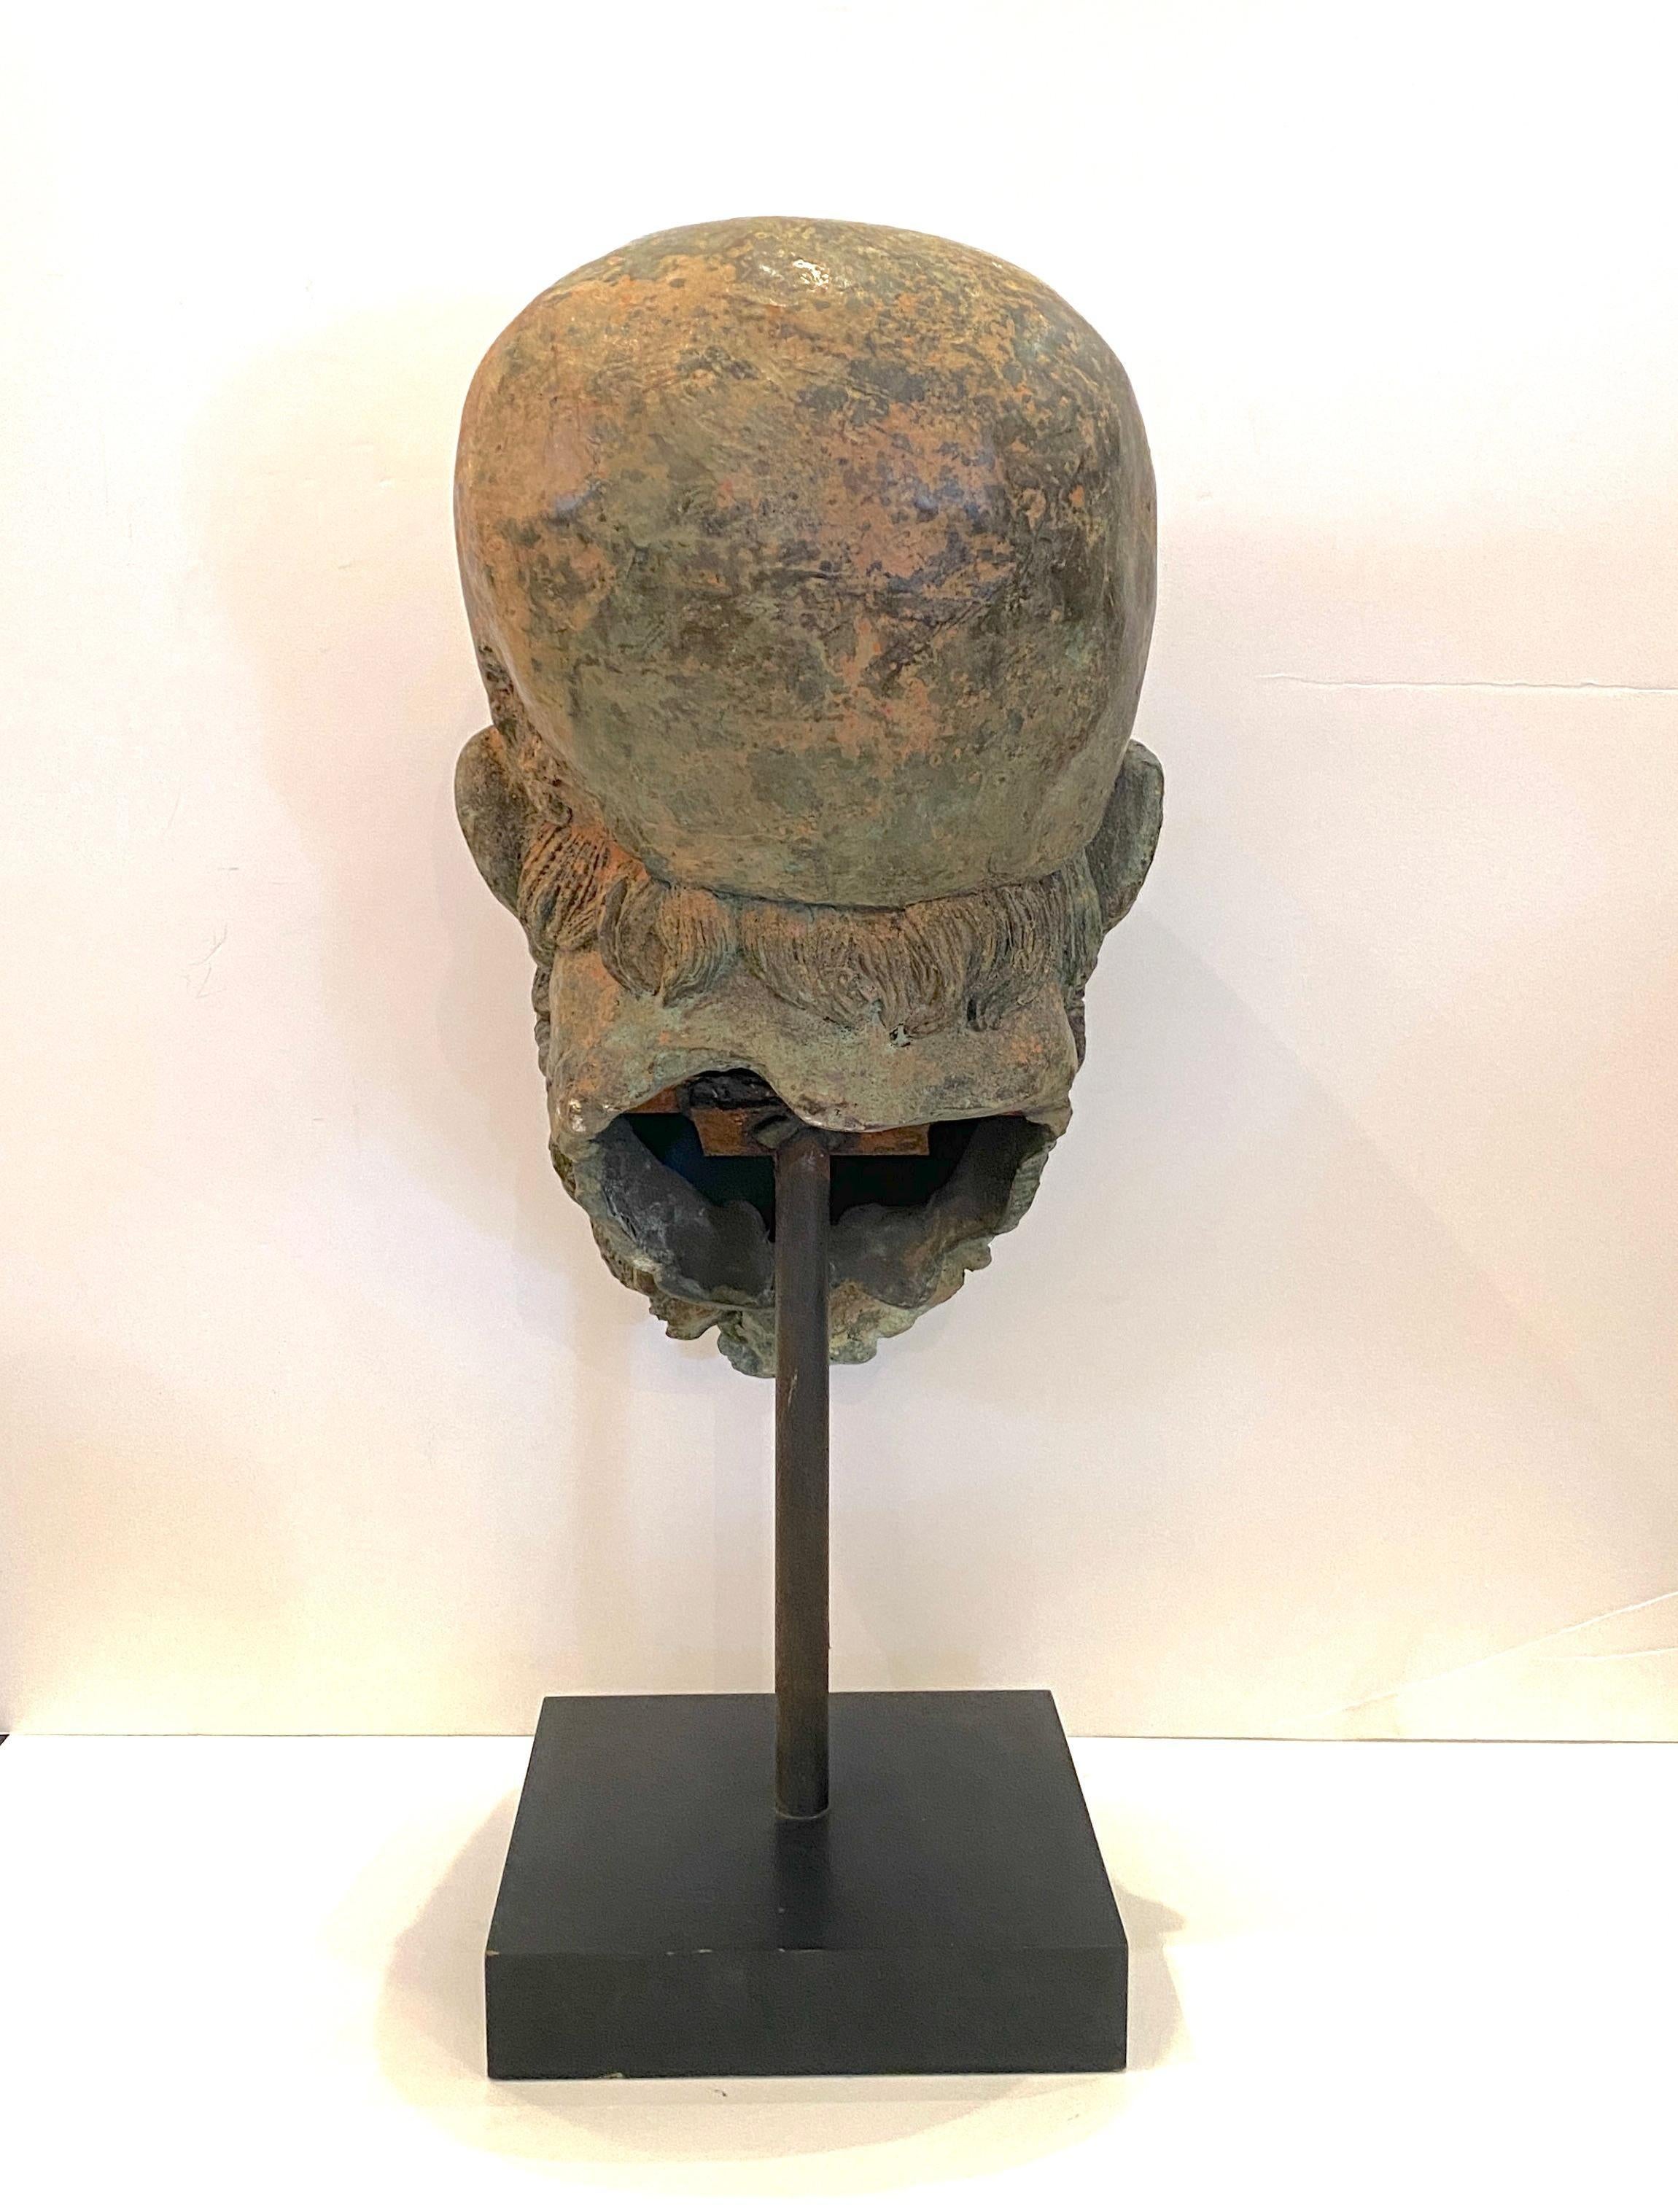 A mounted, cast bronze head of soldier in the Grand Tour style.